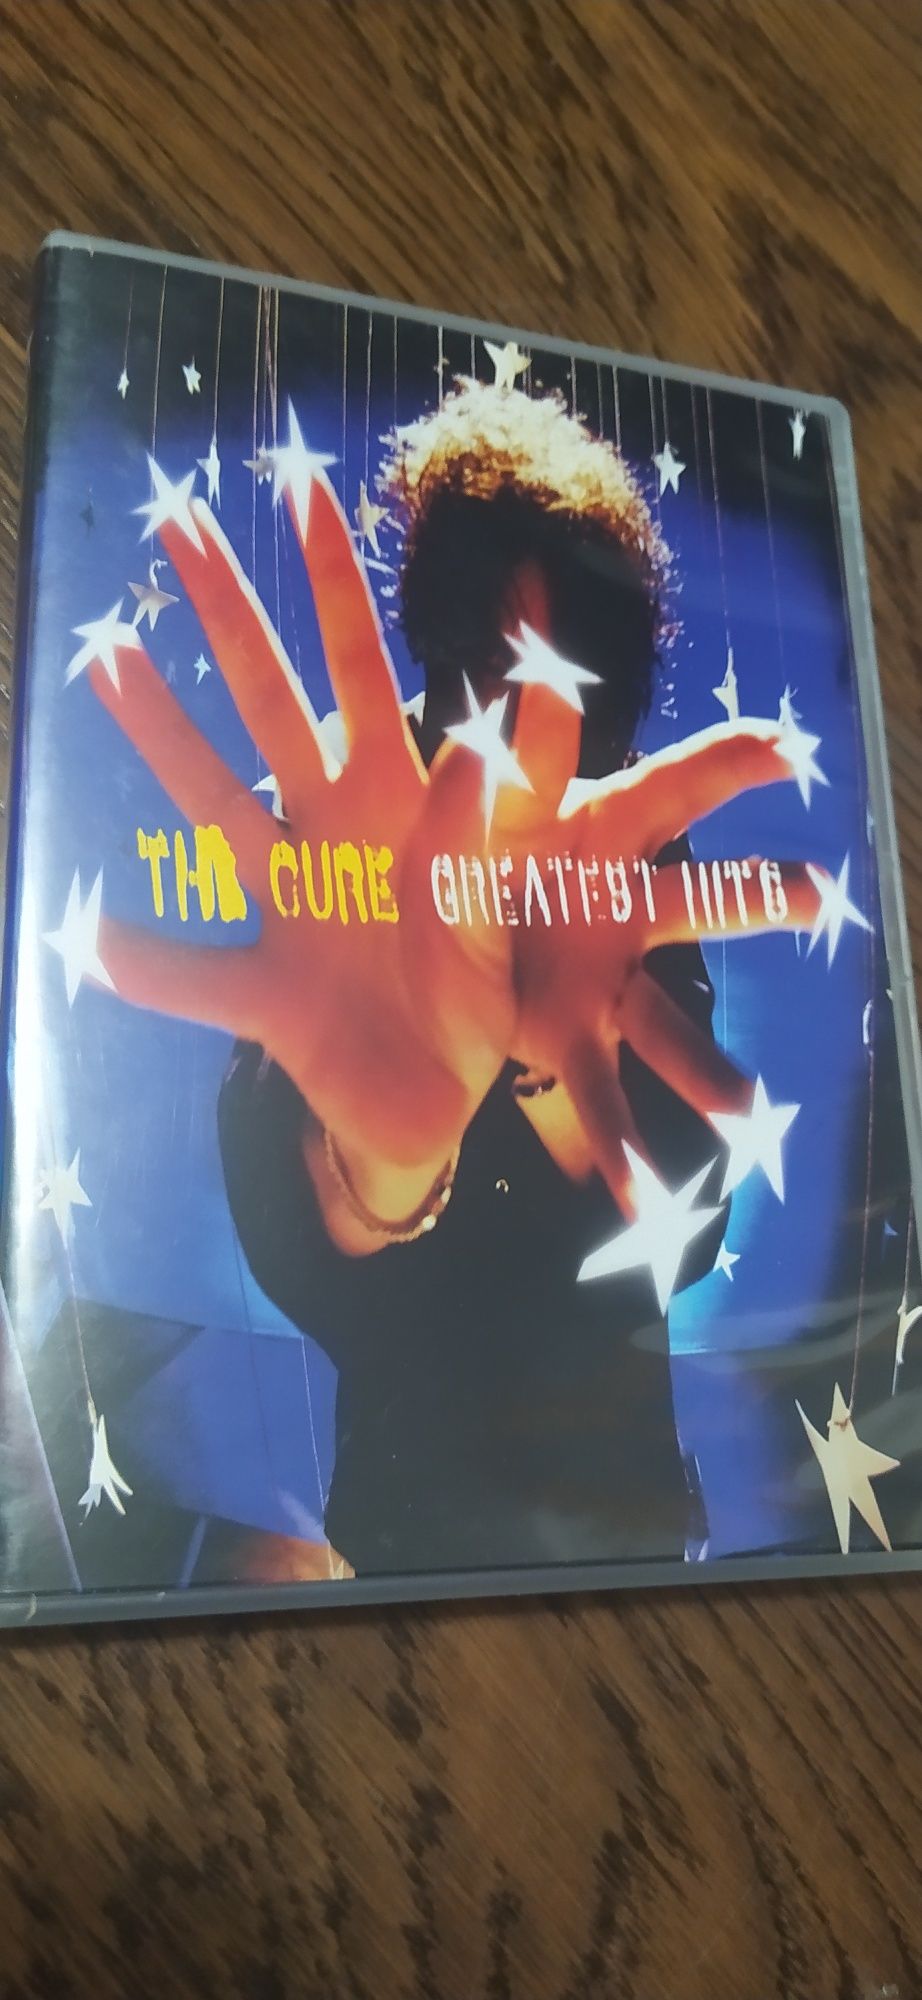 The Cure Greatest Hits dvd